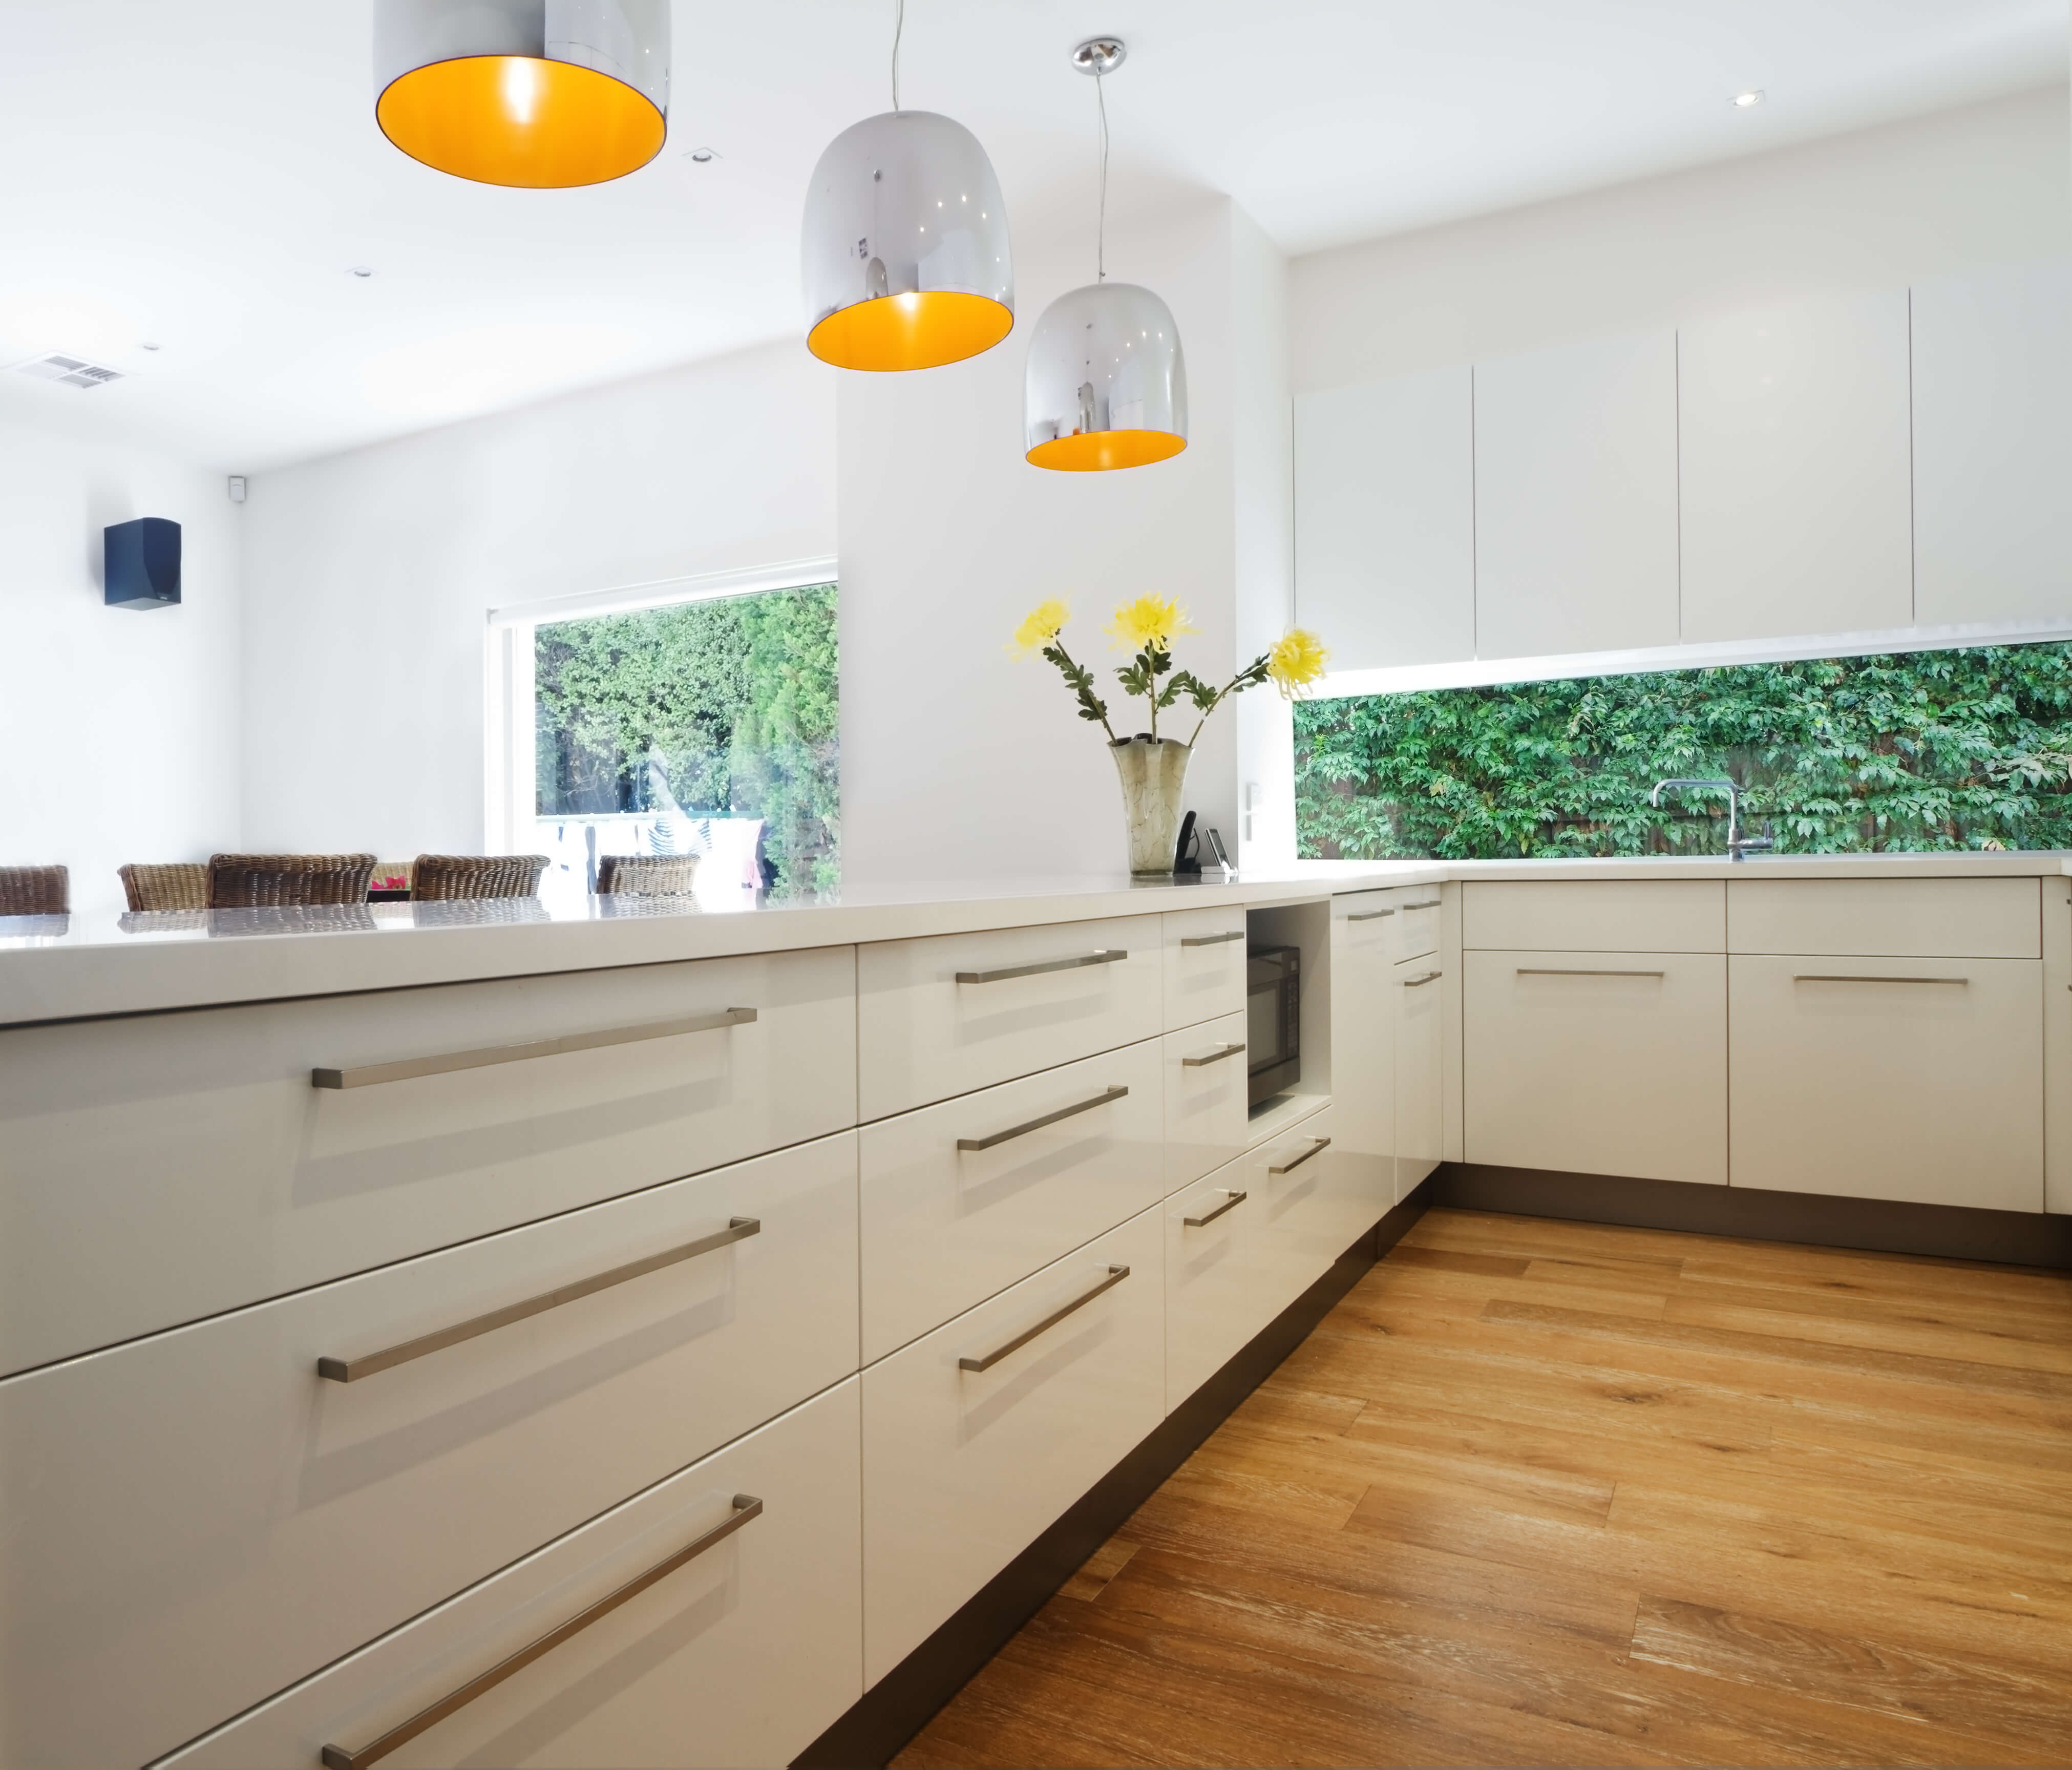 A light kitchen with glazed shining white cabiets and stainless steel accents.